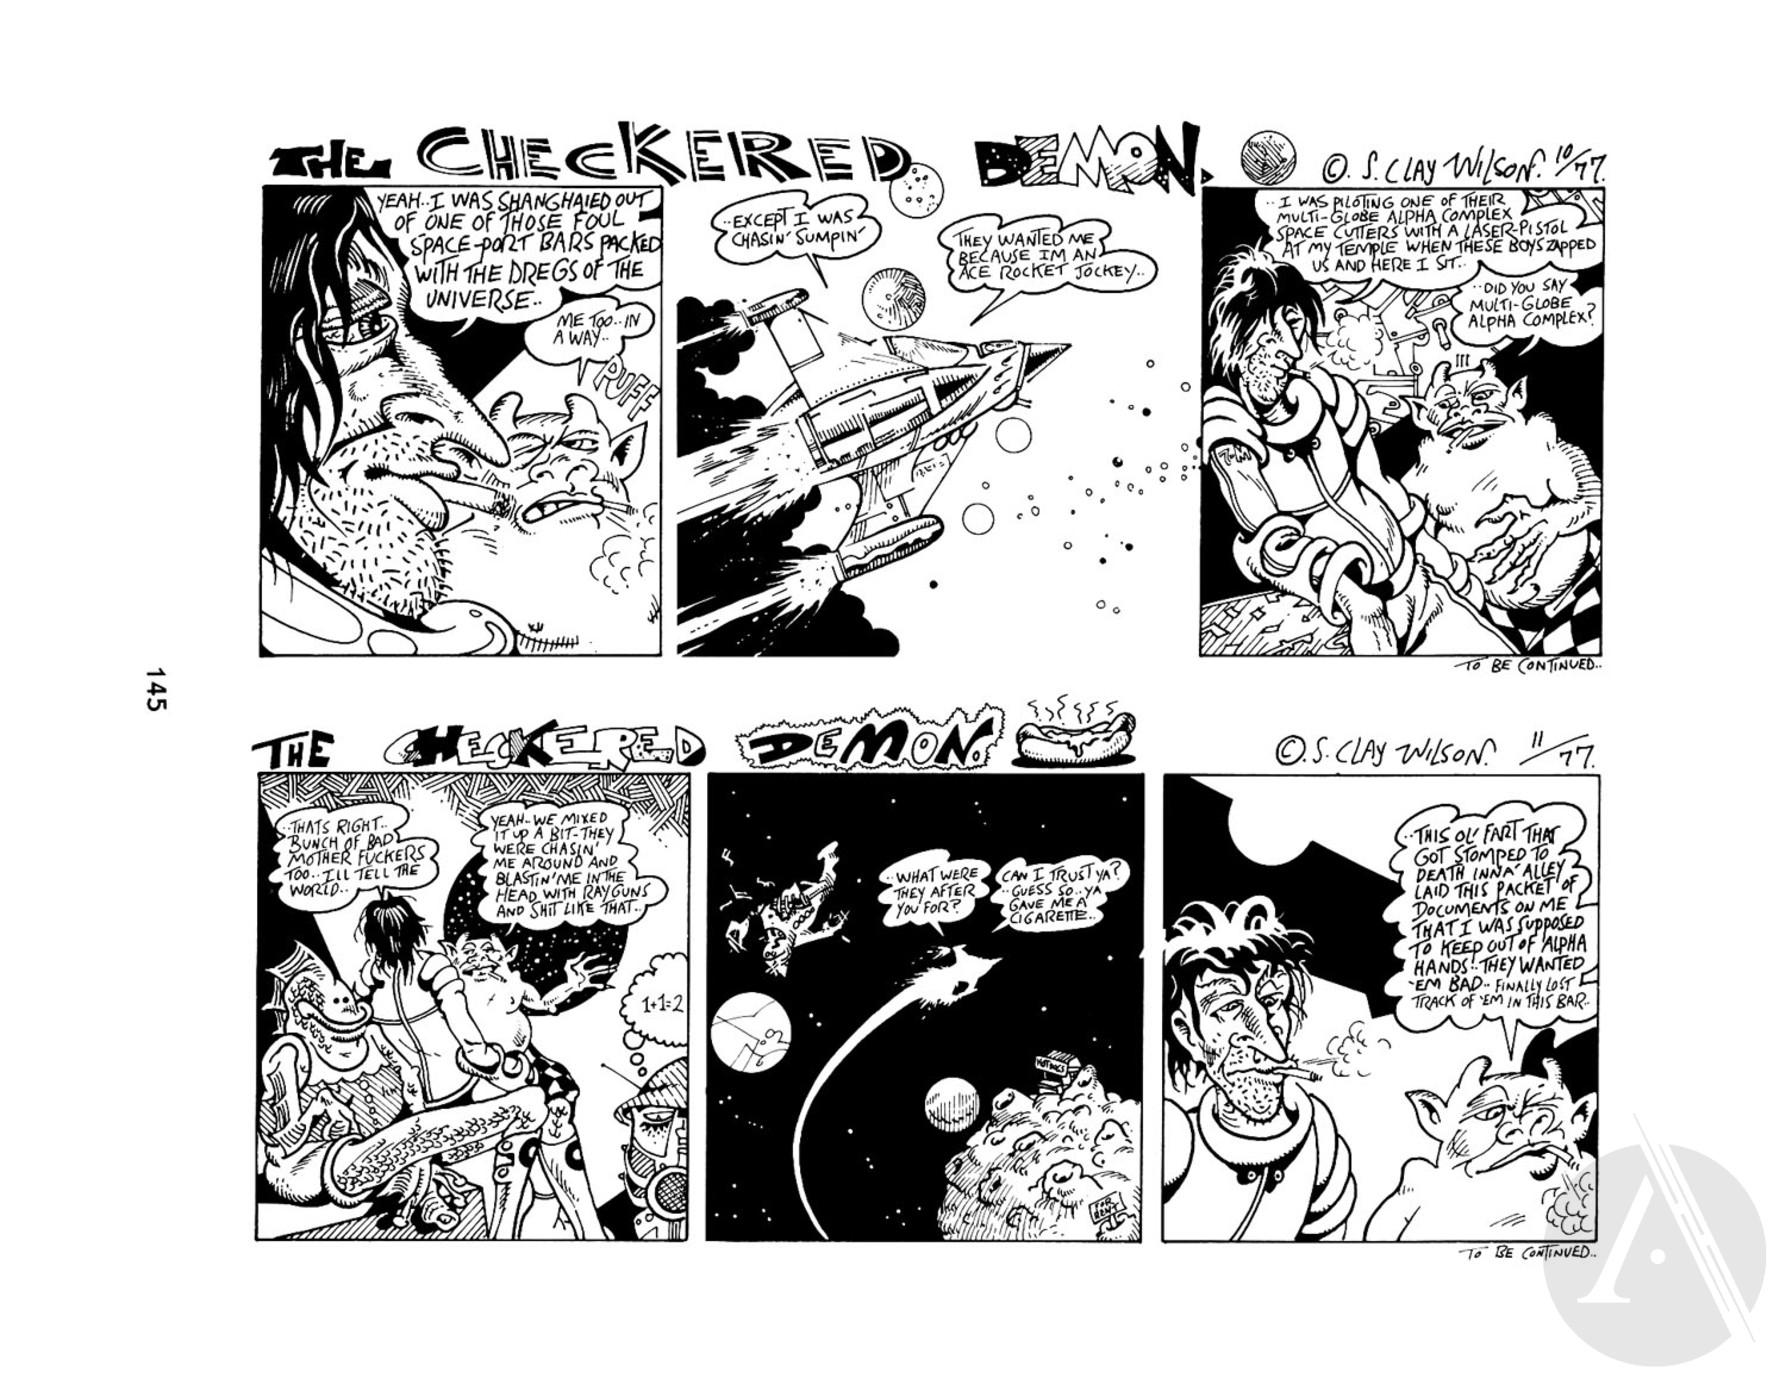 Read online The Collected Checkered Demon comic -  Issue # TPB (Part 2) - 57